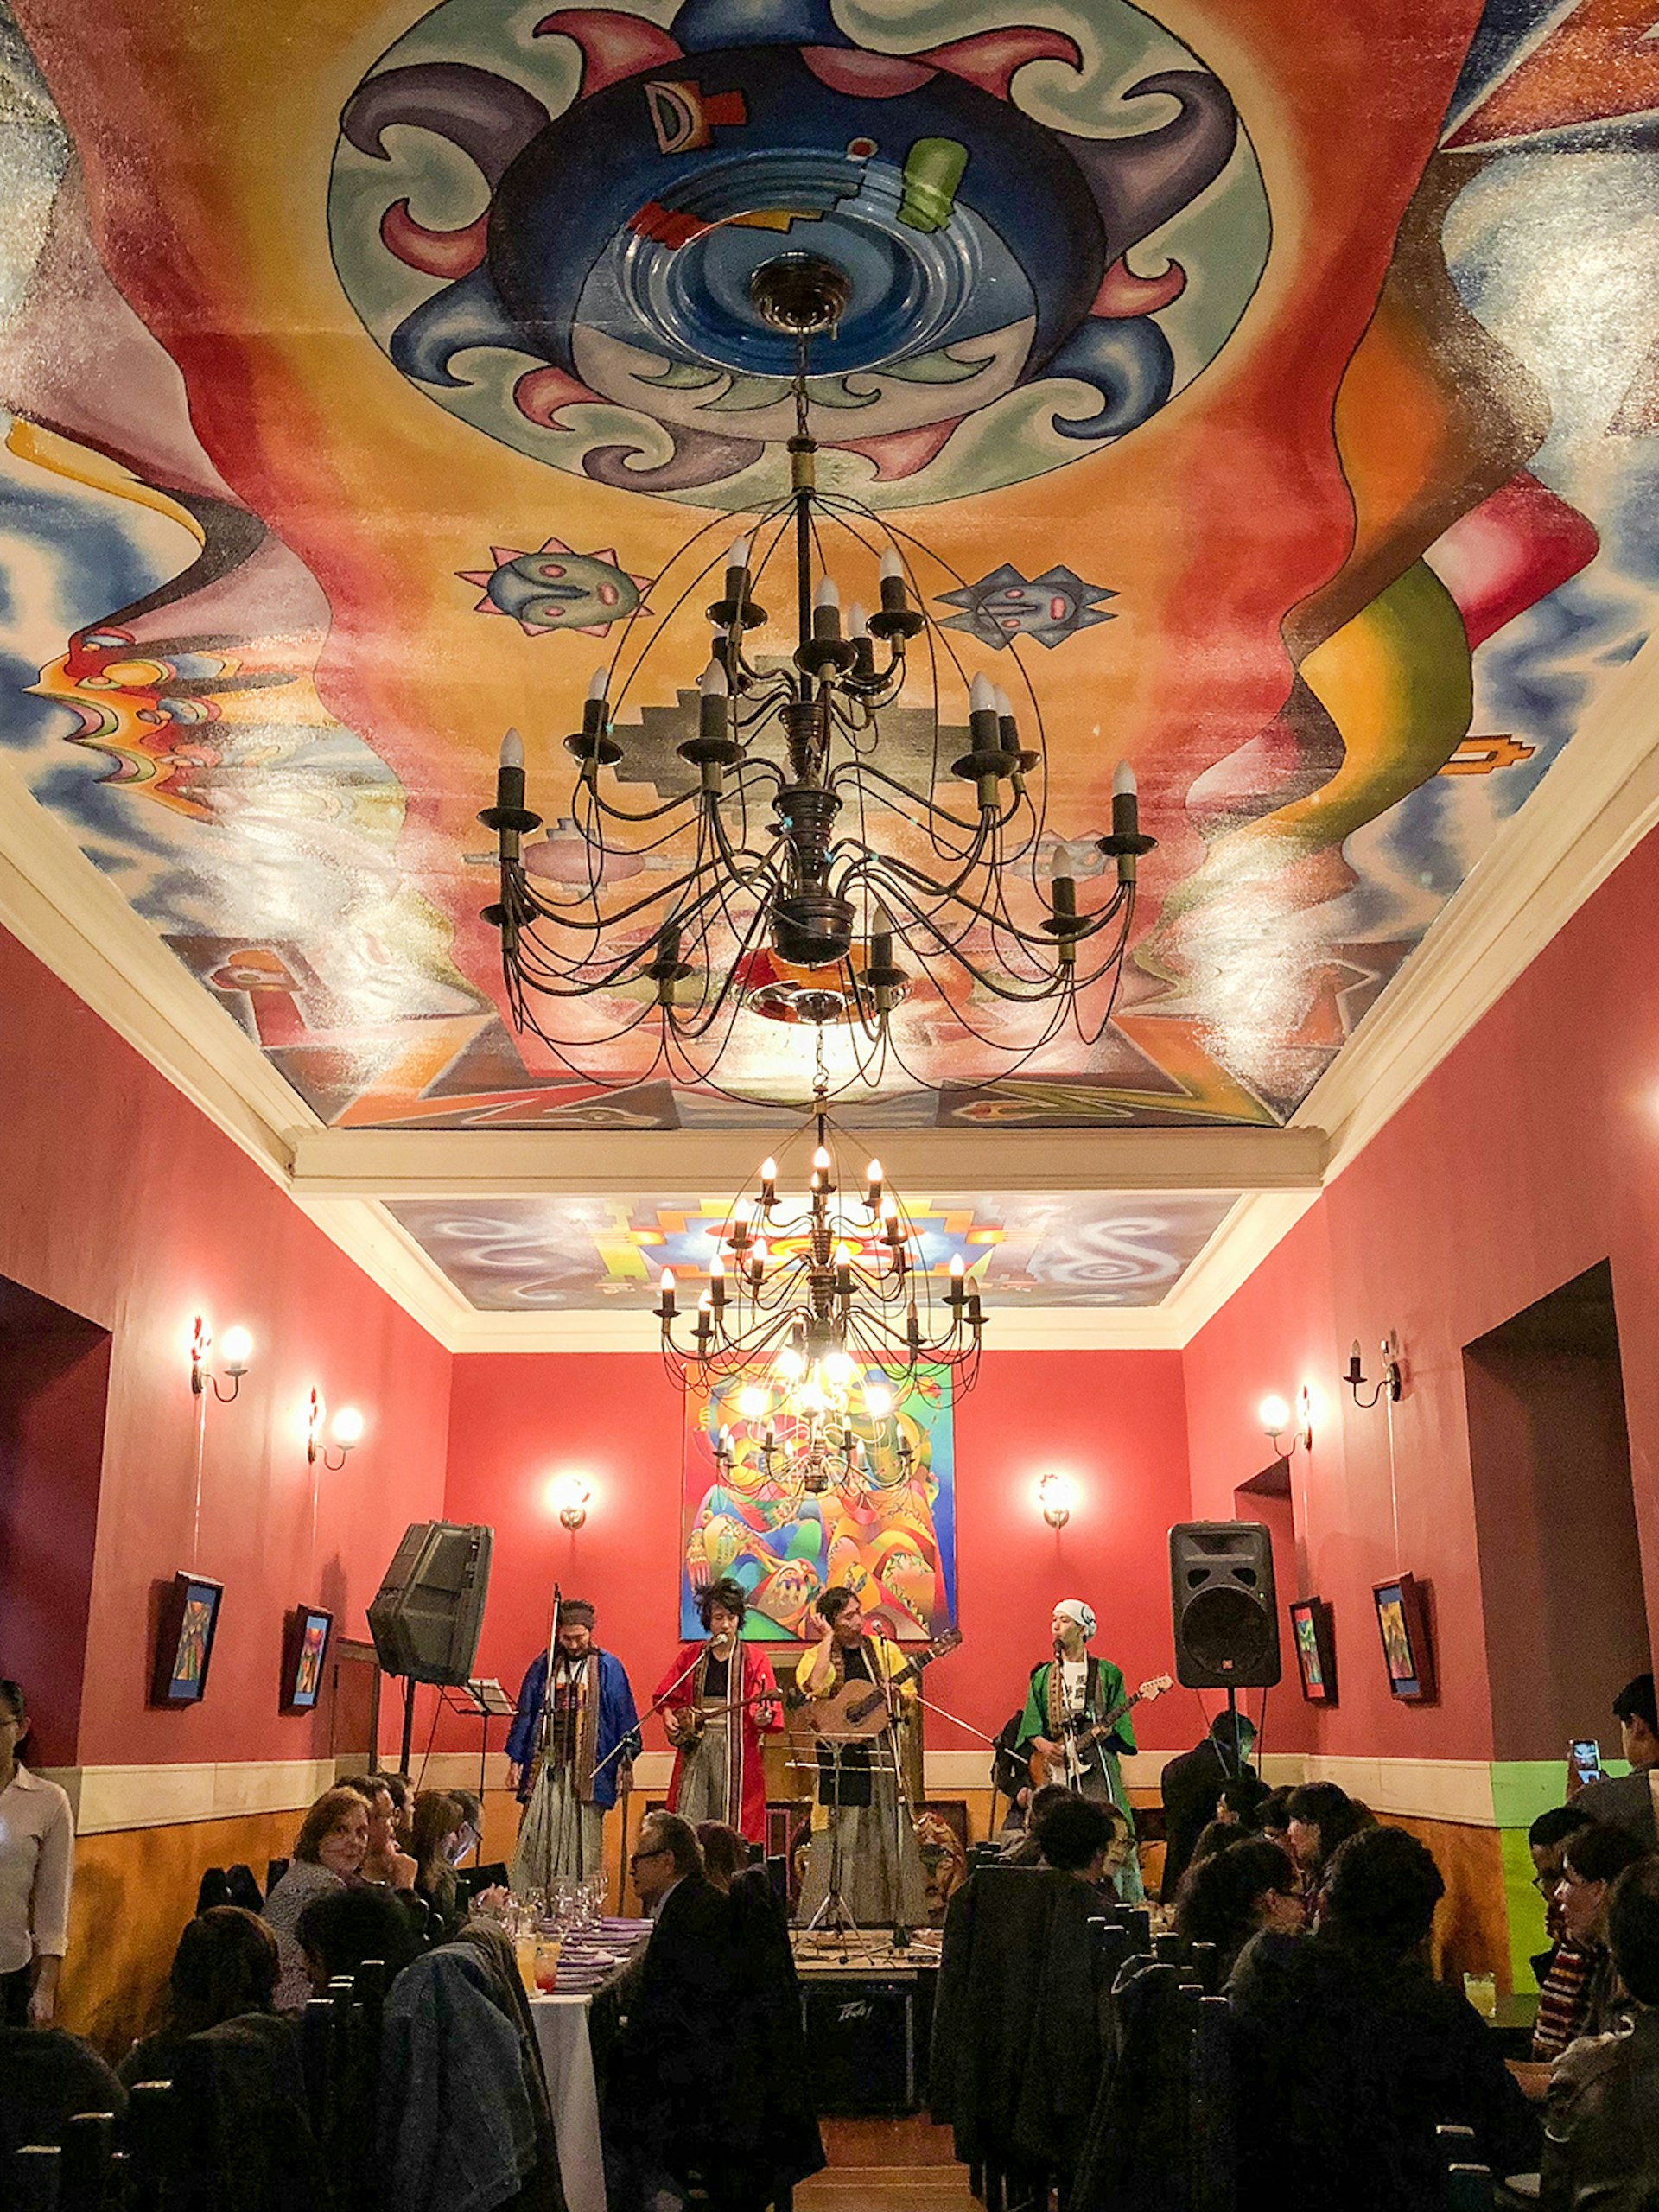 Bolivian musicians play in a red room with a colorful mural on the ceiling. La Paz, Bolivia.